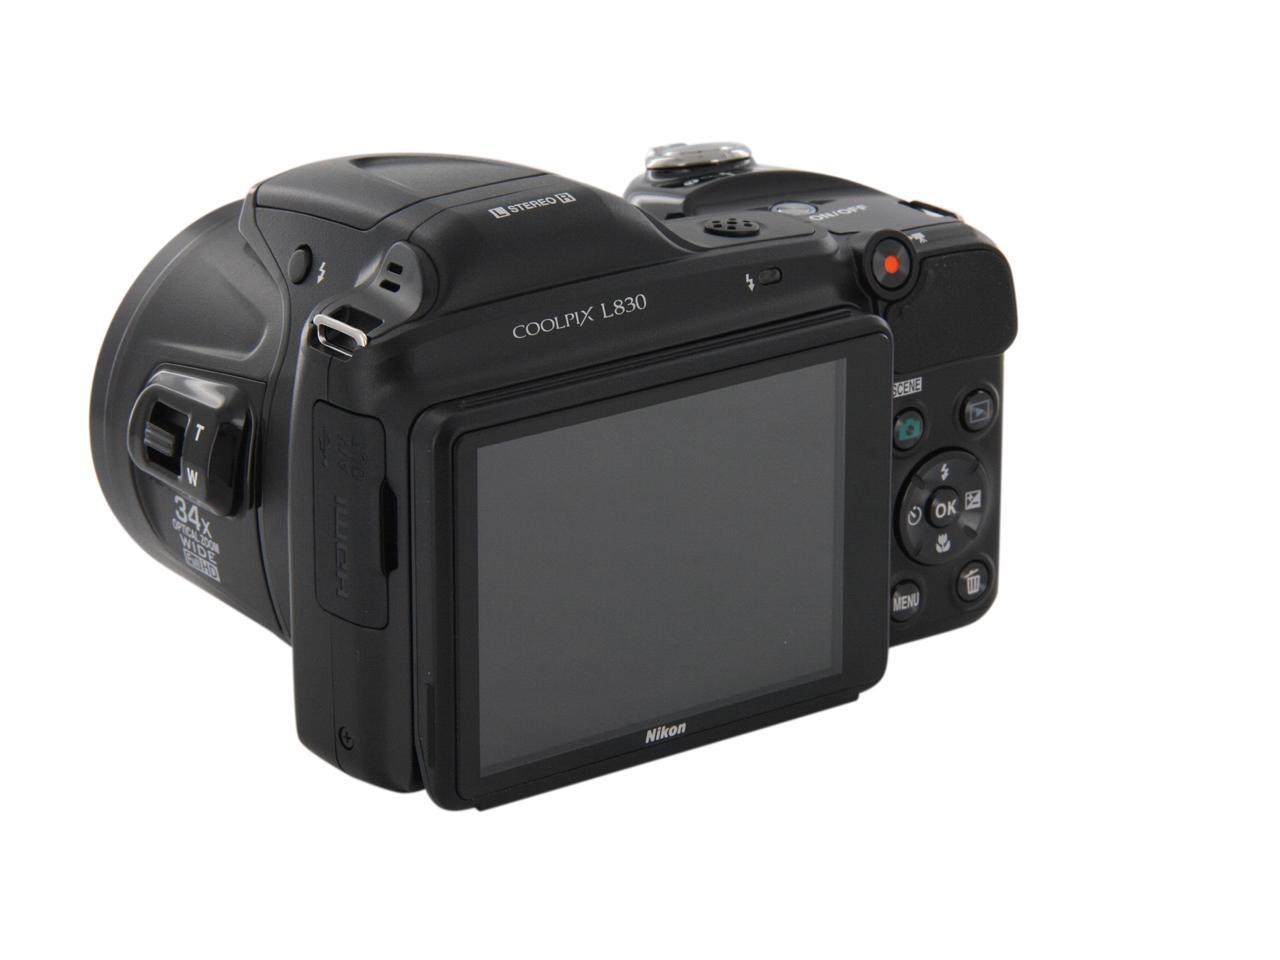 specification Stop by Mainstream Nikon COOLPIX L830 Black 16 MP Wide Angle Digital Camera HDTV Output -  Newegg.com